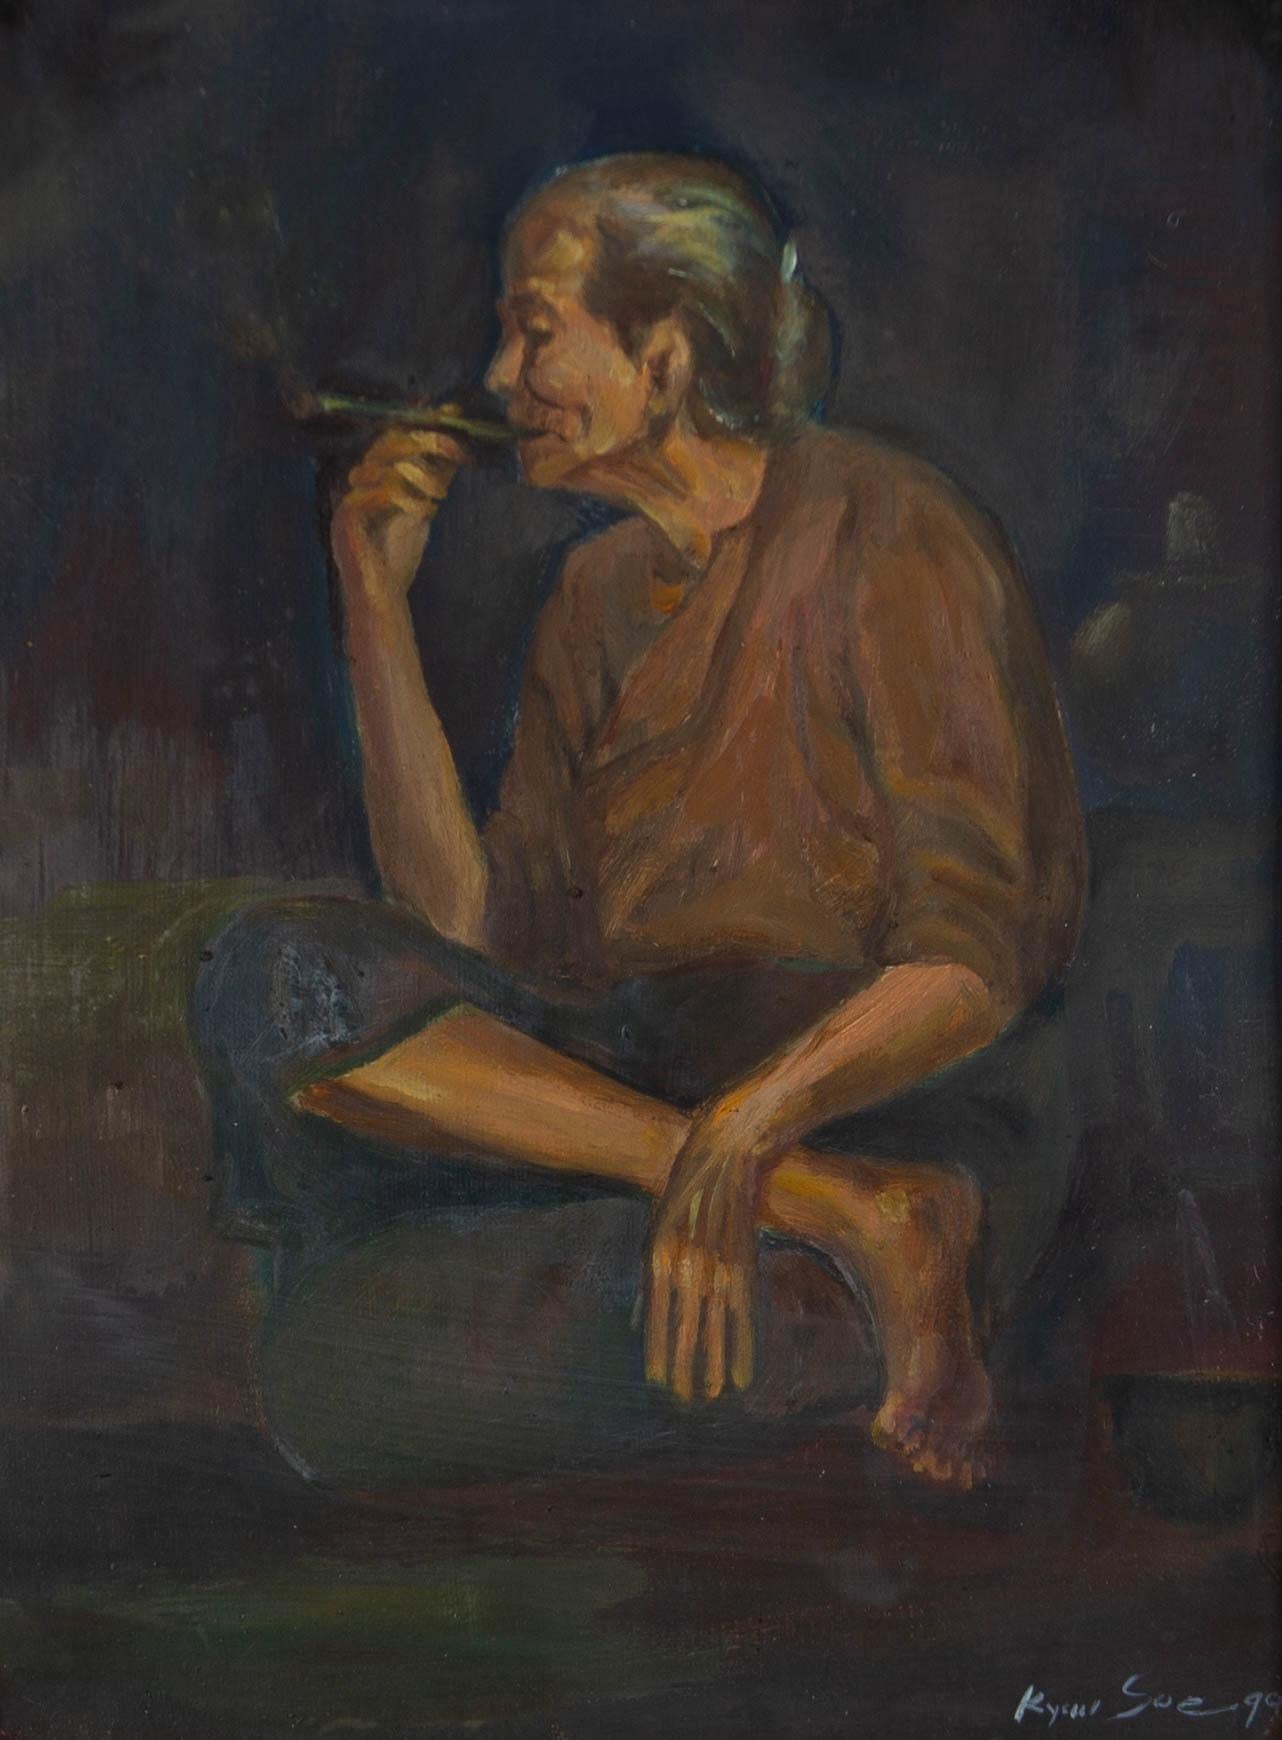 Dim light illuminates a smoking woman in an impressionistic manner. The artwork is signed and dated in the bottom right-hand corner. Well presented in a gilded wood frame with a linen slip and a gilded inner window. On wove.